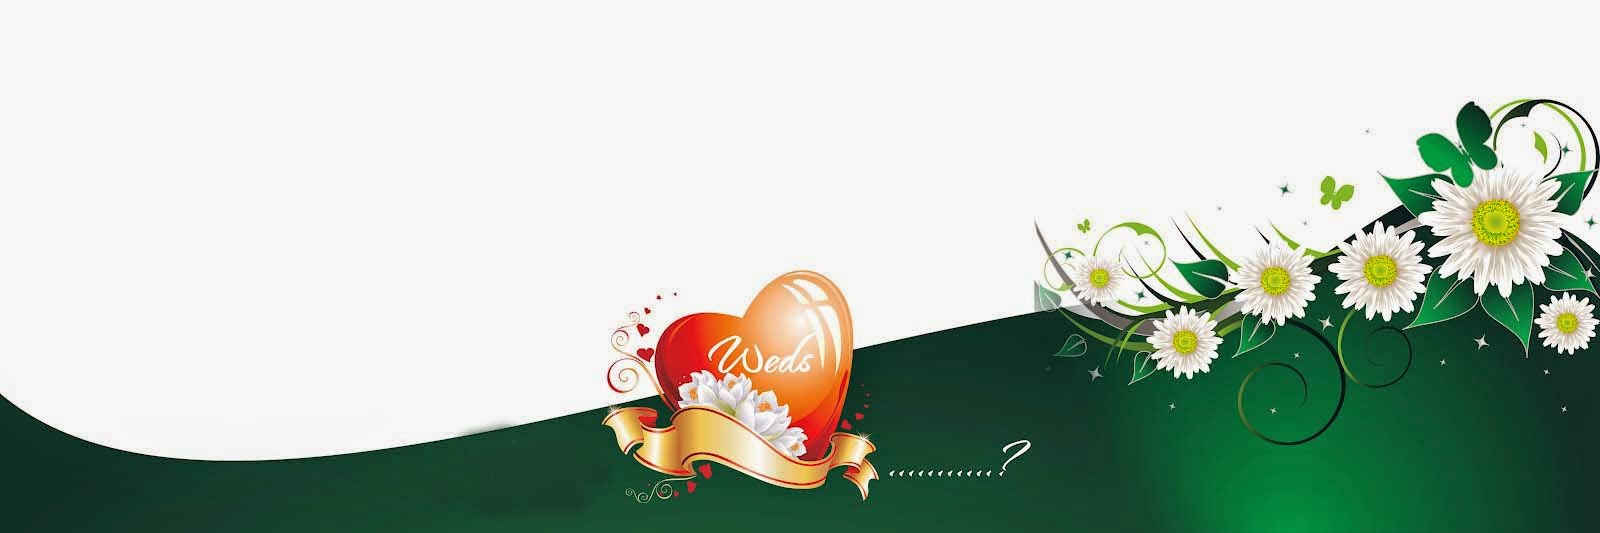 indian clipart psd - photo #47